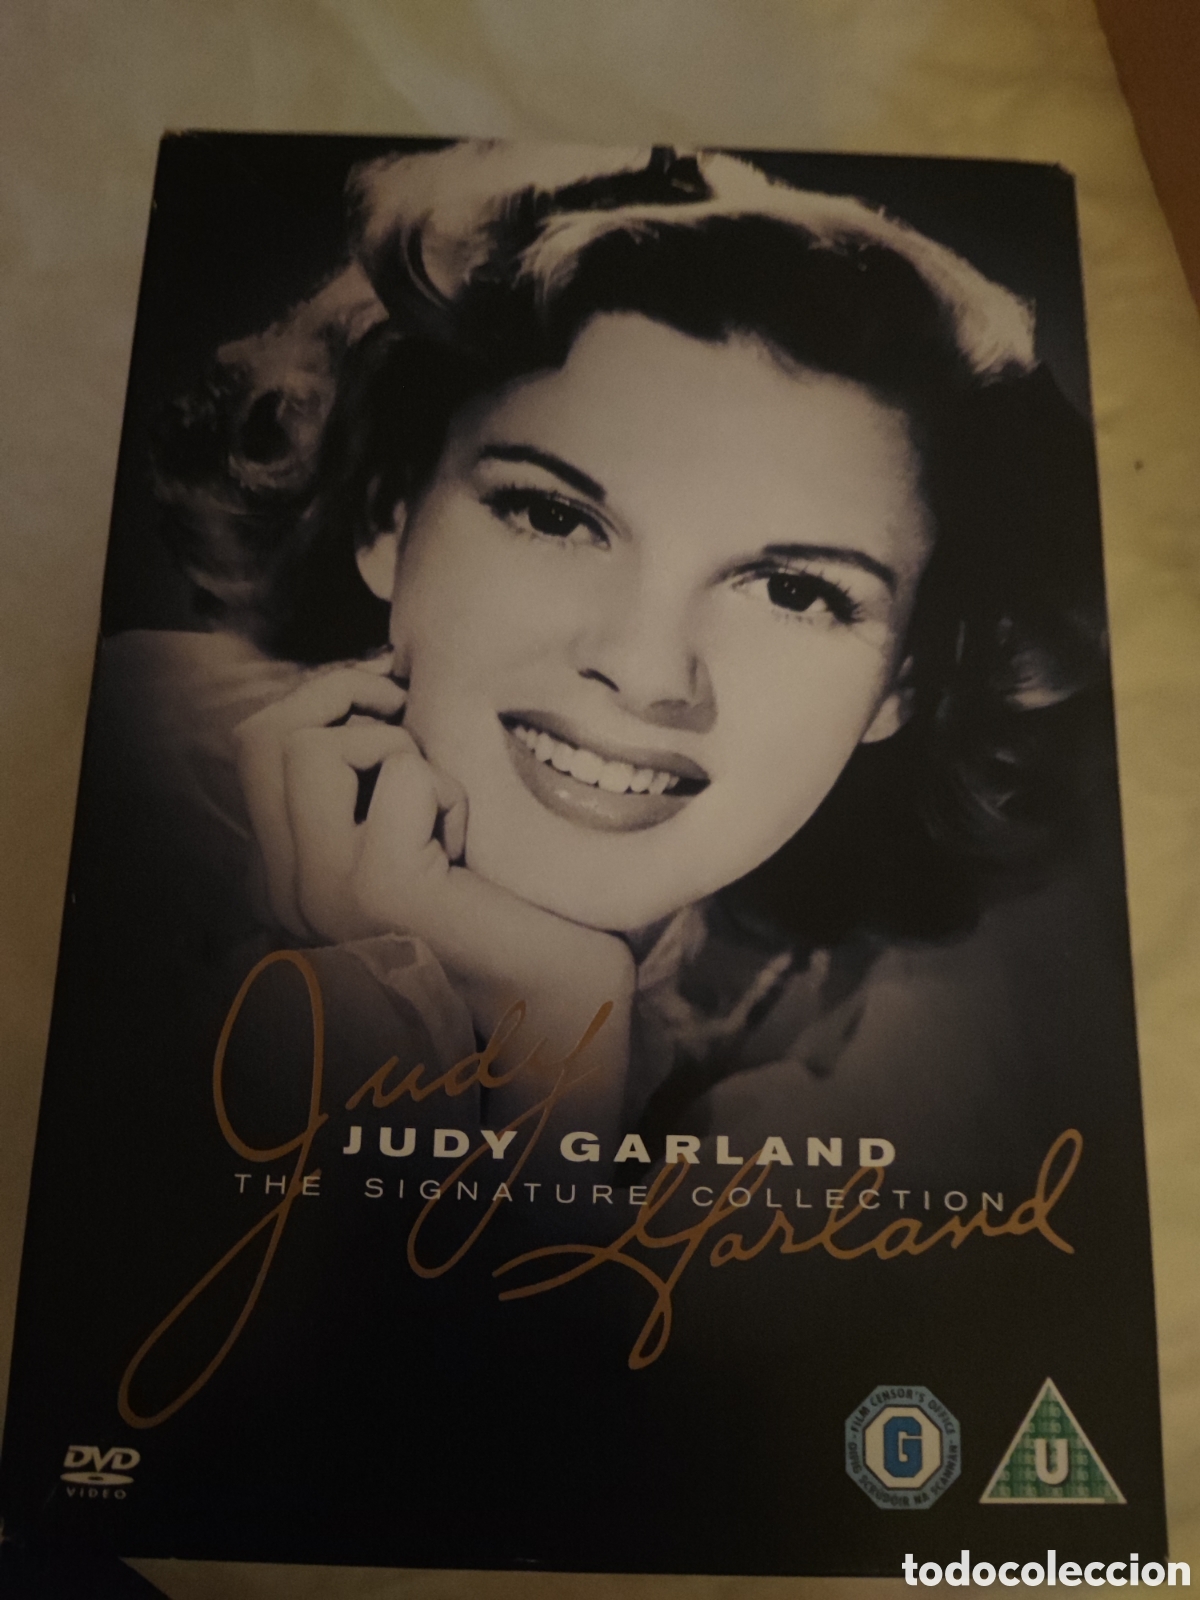 judy garland dvds signature collection - Buy Music videos on VHS and DVD on  todocoleccion